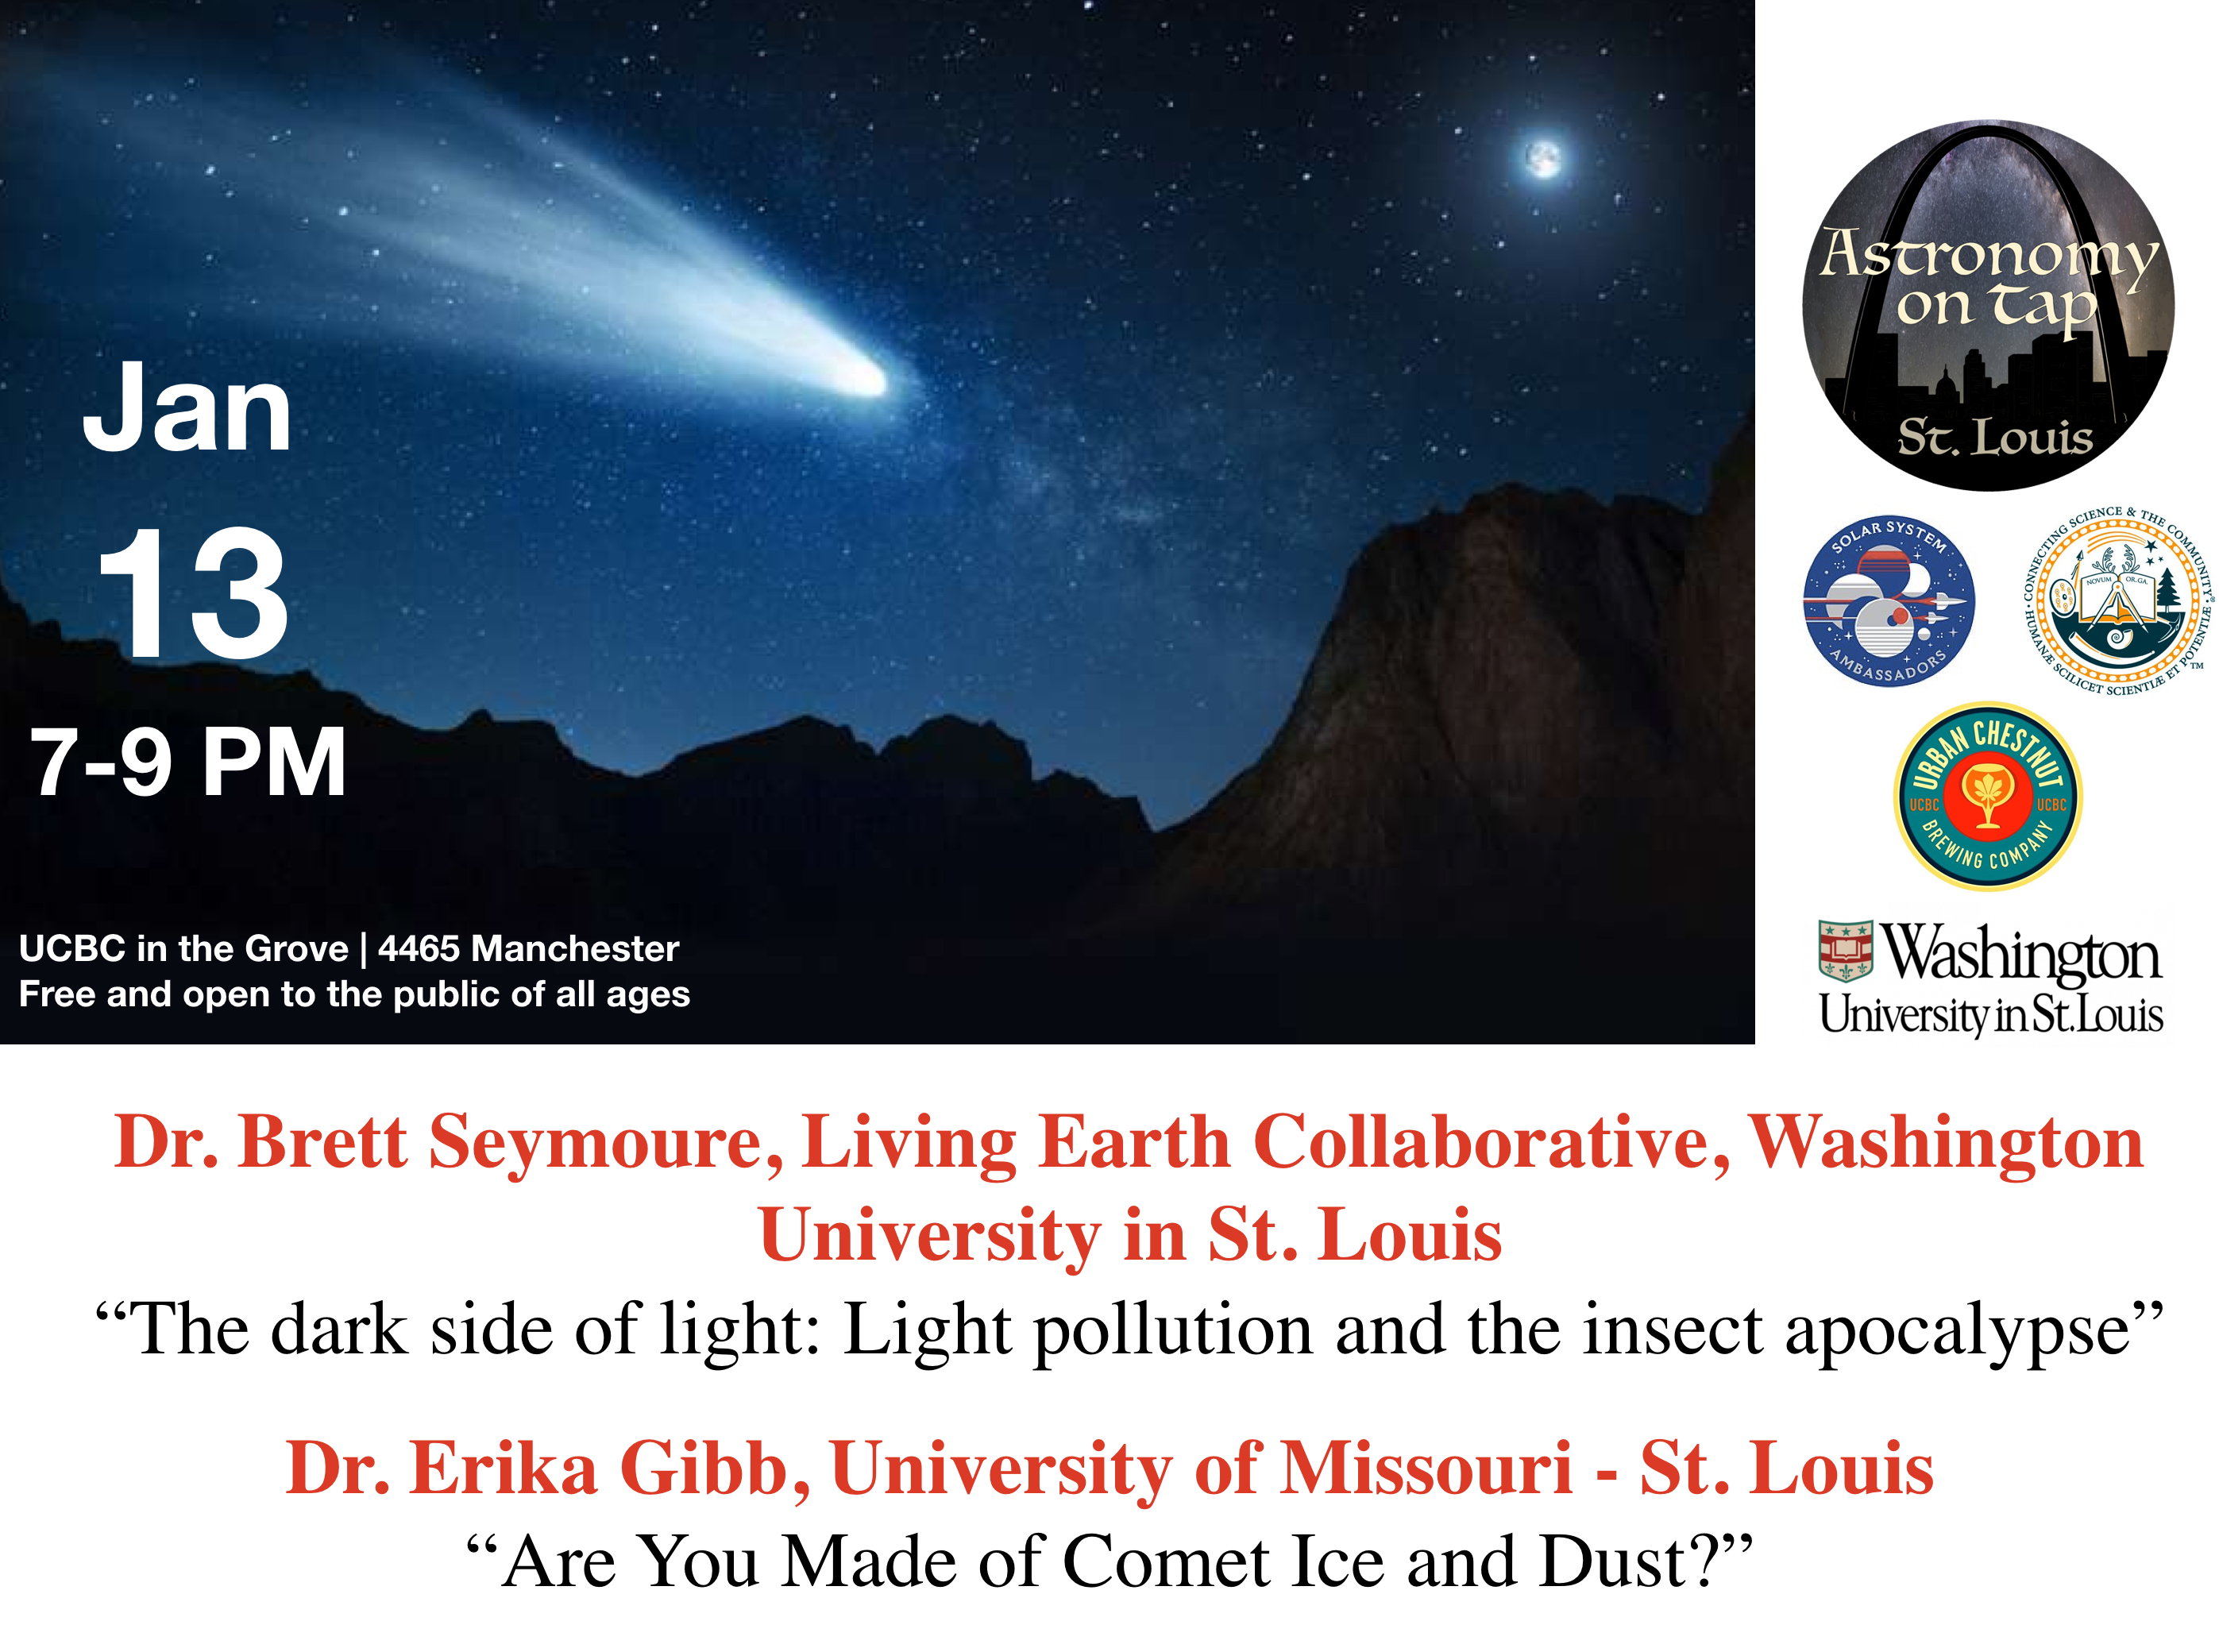 Astronomy on Tap-St. Louis, January 13th, 2020 – Astronomy On Tap